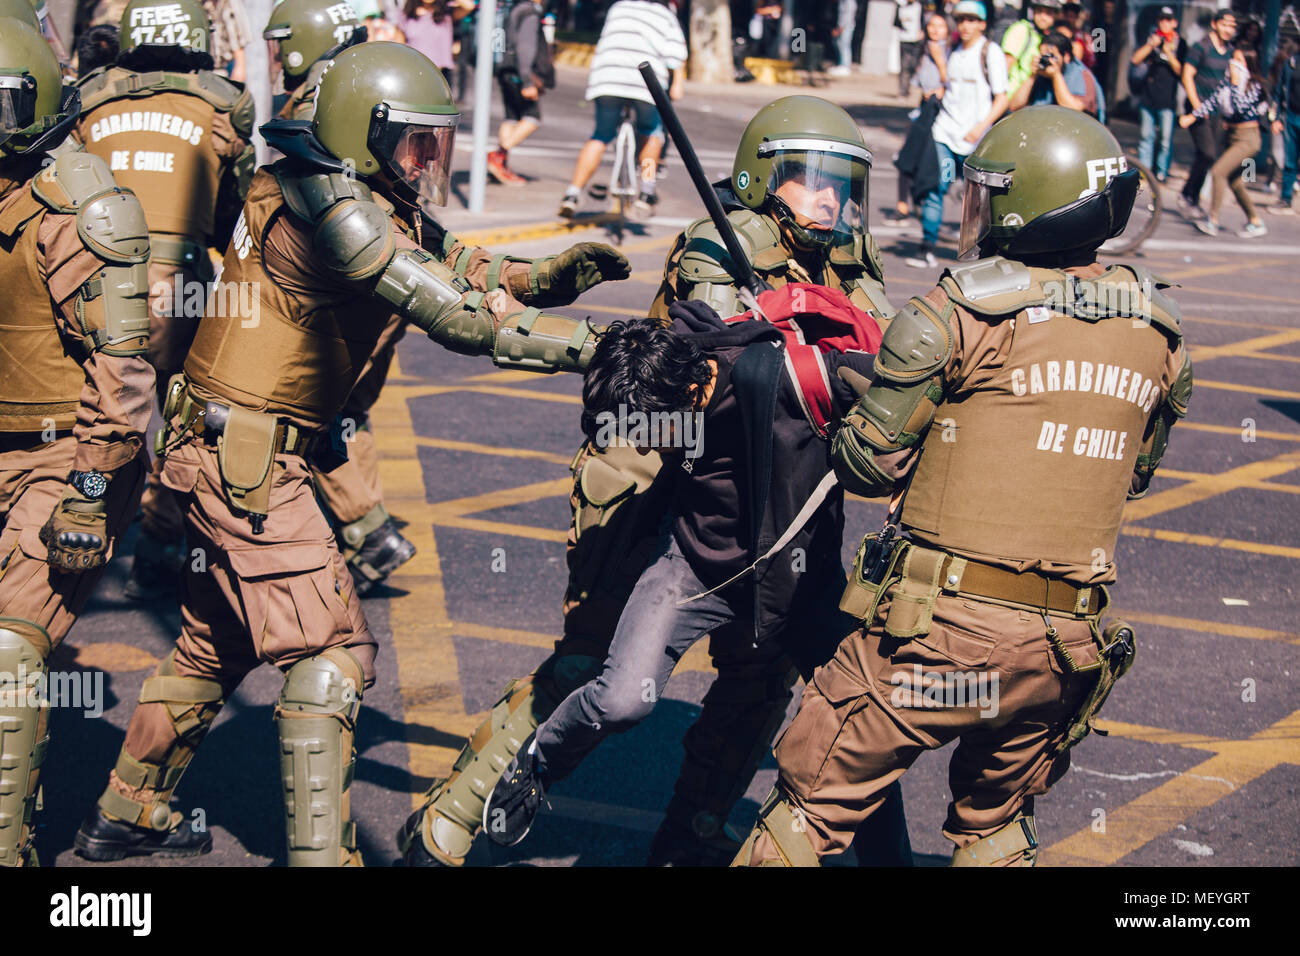 Santiago, Chile - April 19, 2018: Protester arrested by the chilean riot police during a demonstration demanding an end to the Profit in the Education Stock Photo